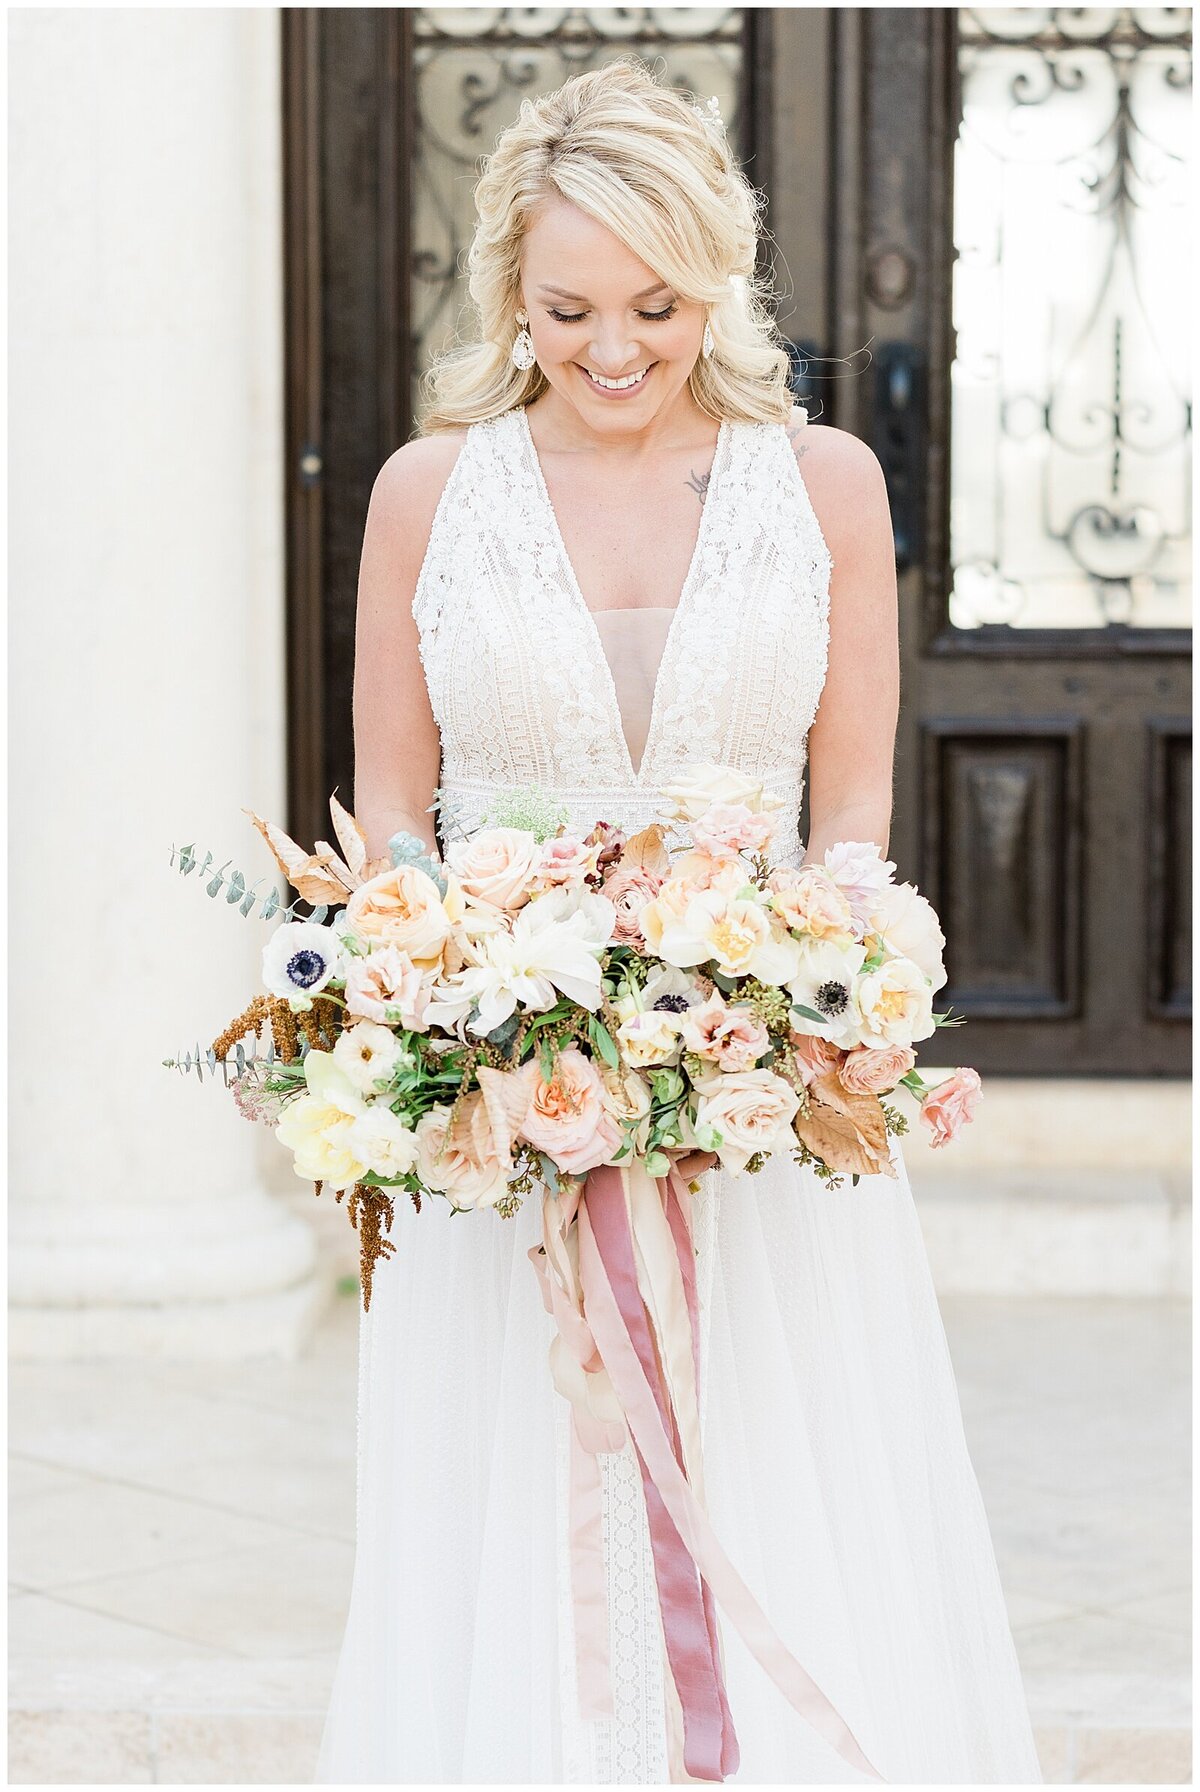 Bride standing in front of ornate door with white and pink bouquet